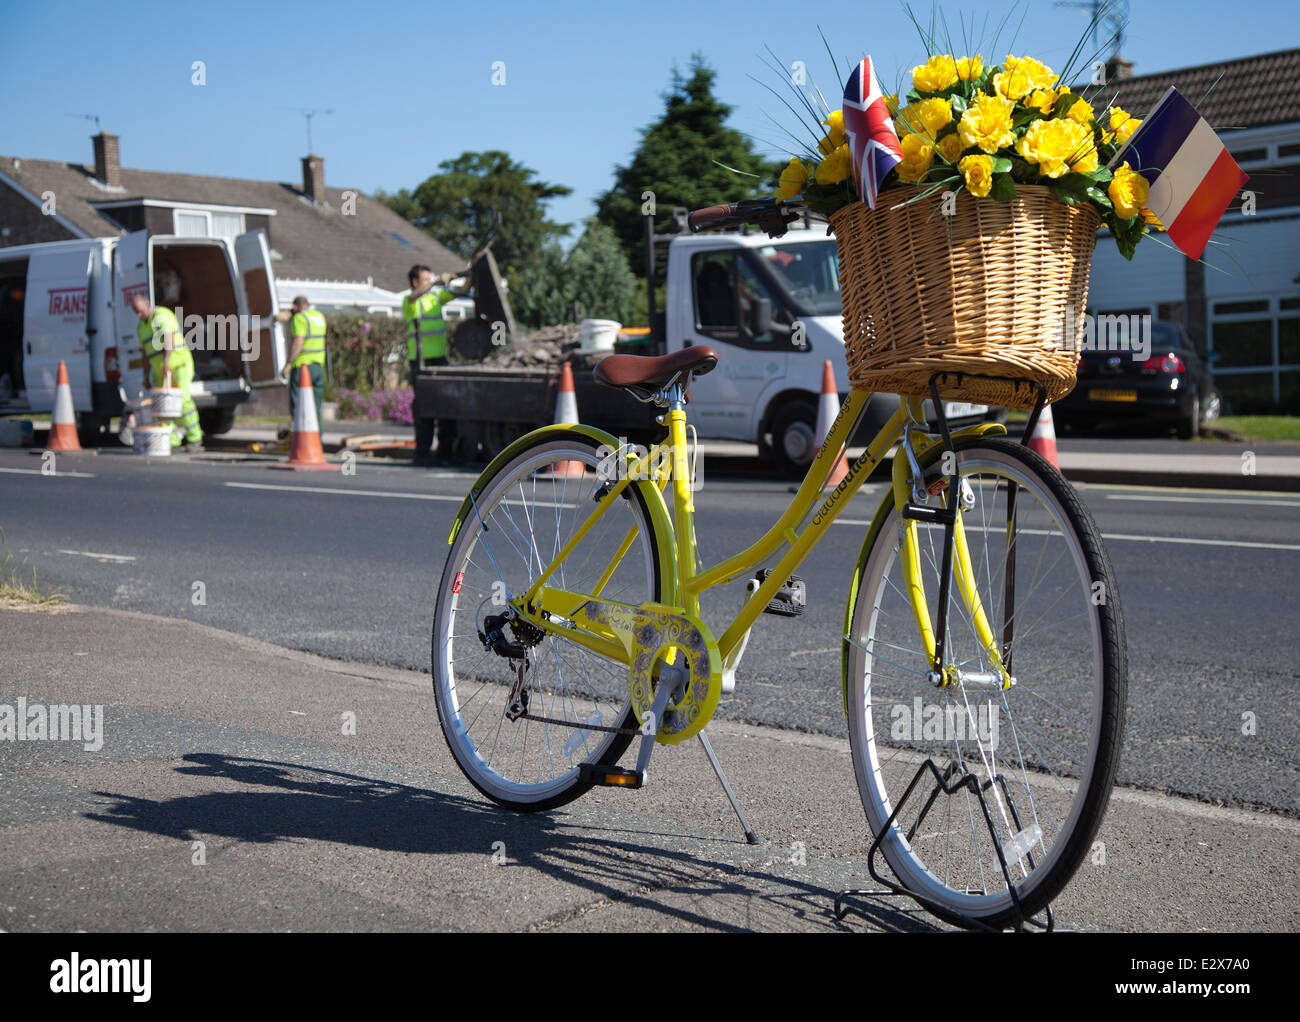 Women's floral decorated yellow bicycle in York, Yorkshire, UK. 21st June, 2014.  Maintenance crew carrying out Saturday Road repairs on the  Tour de France route.  A total of £4million has been allocated by eight Yorkshire councils to get the region’s roads repaired and the route ready for Tour de France in July.  The money is being spent to ensure that the 389 kilometres of tarmac to be used for the 2014 Tour’s Grand Depart, will be pothole free. The route is now being lined with yellow flowers, wickerwork baskets, bunting and bikes. Stock Photo